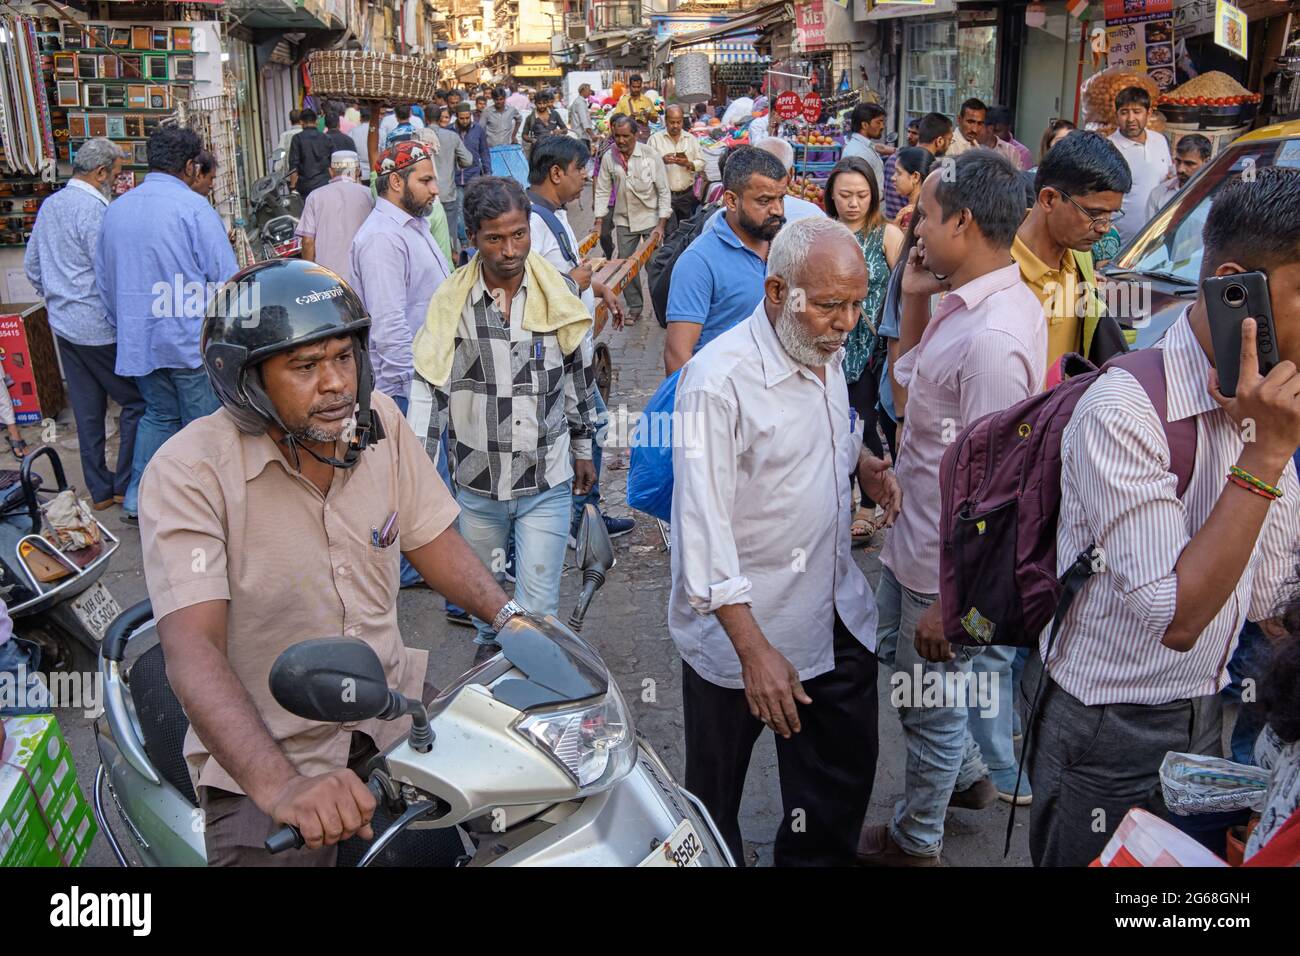 During the late afternoon rush, a motorcyclist drives through the through a throng of people in a lane in Zaveri Bazar, Mumbai (Bombay), India Stock Photo